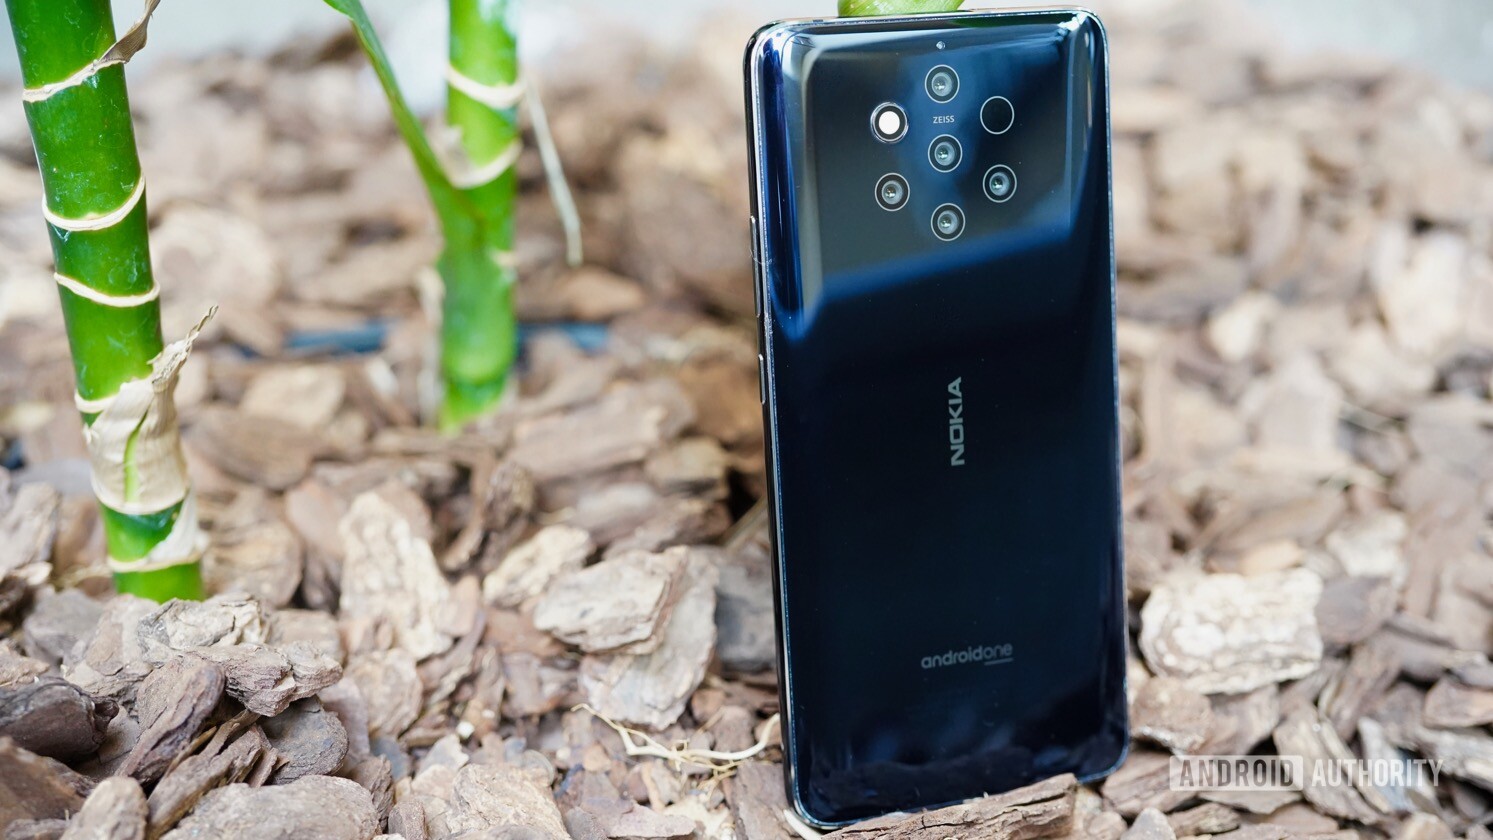 The back of the Nokia 9 PureView smartphone.